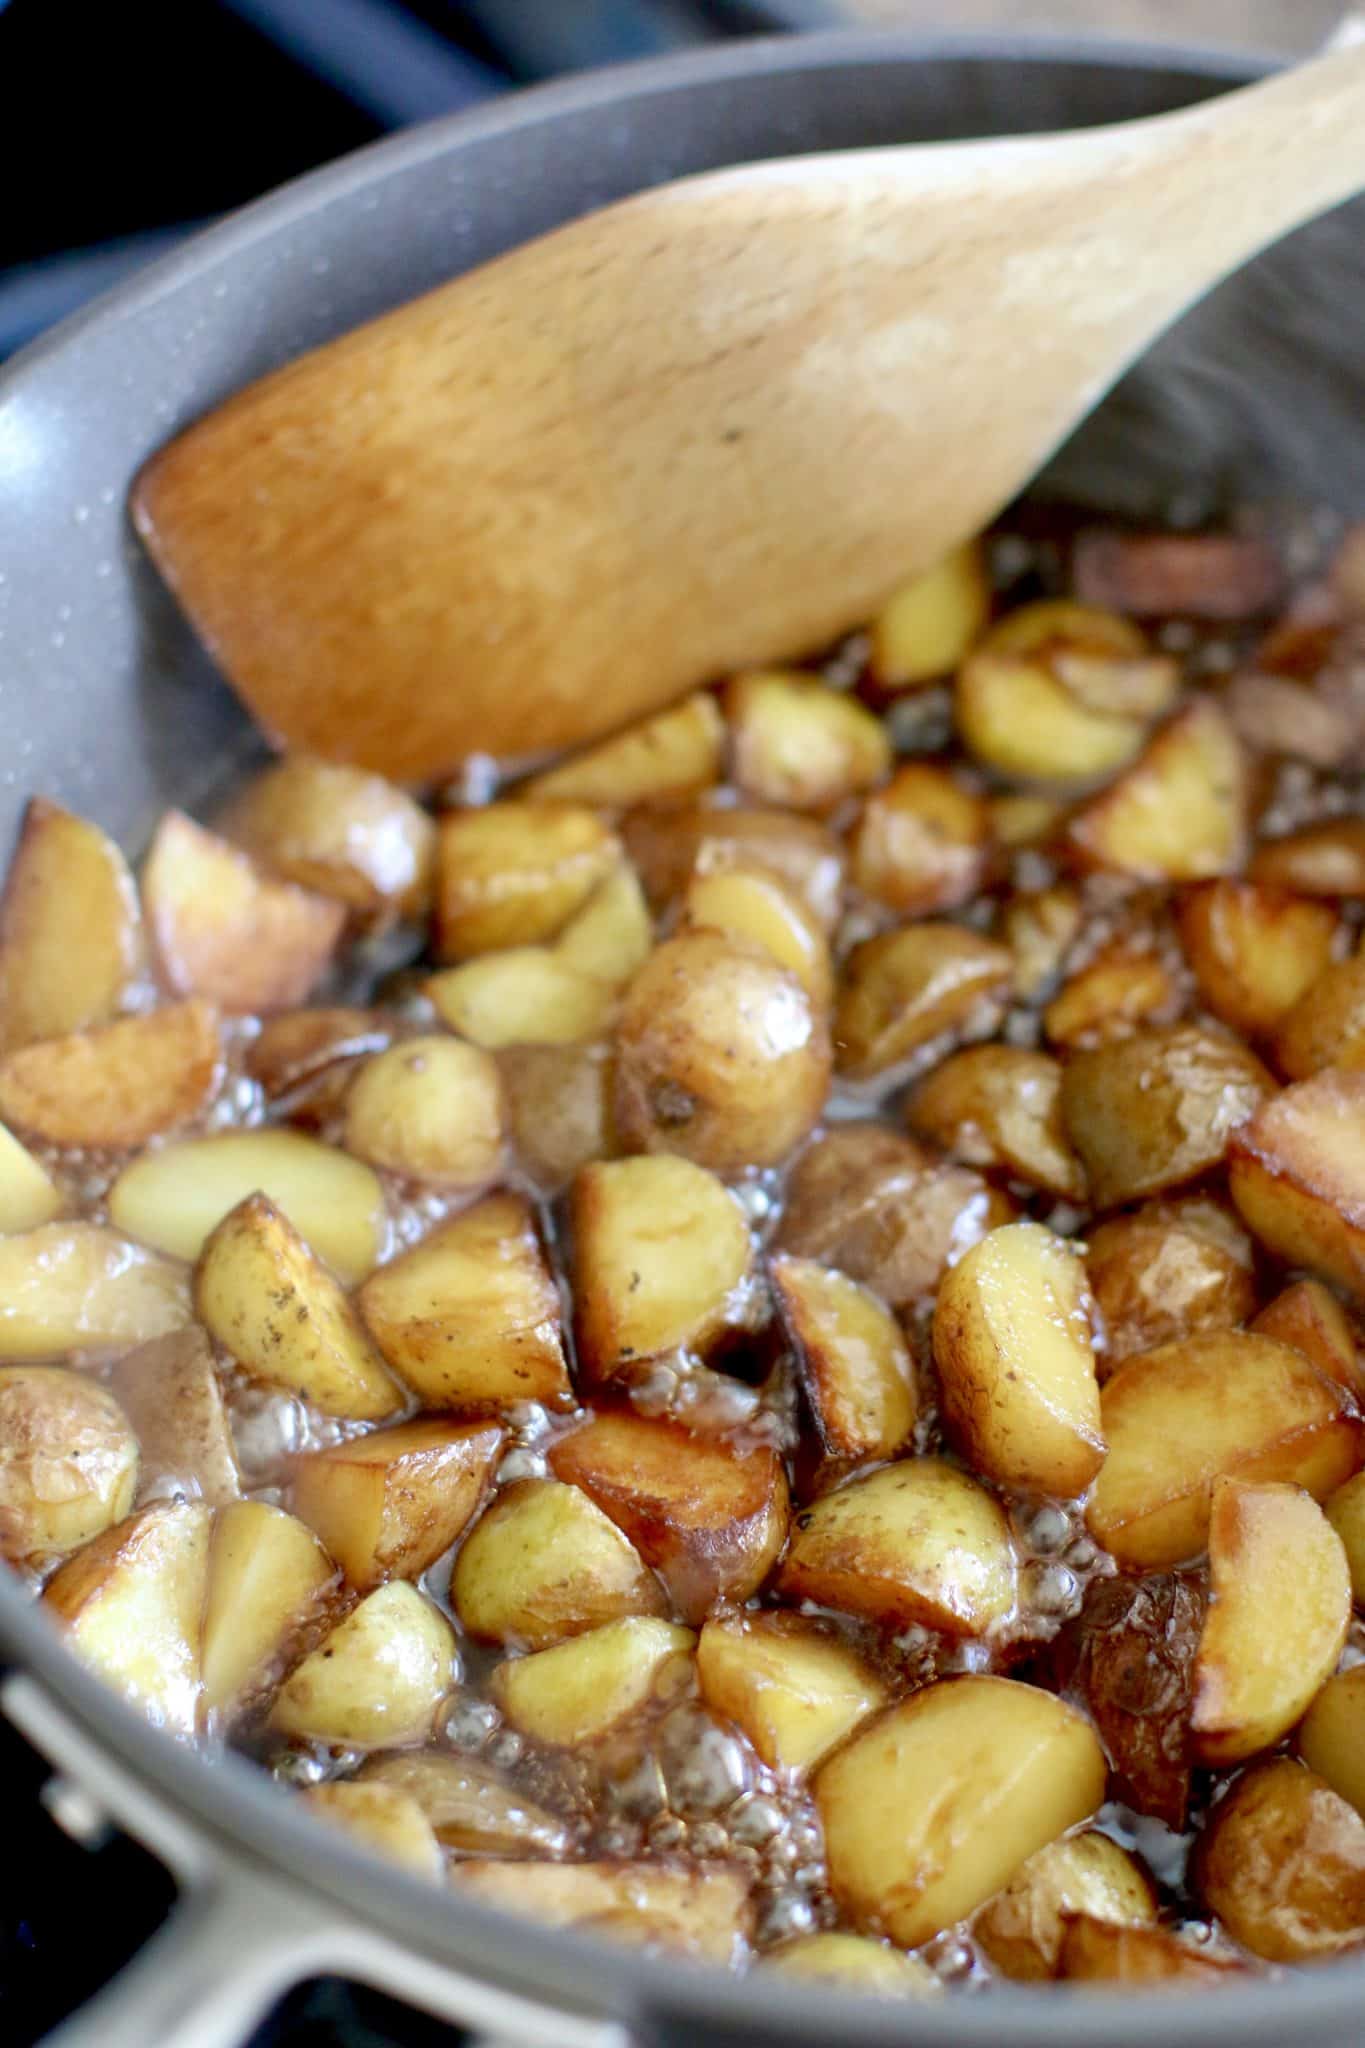 corn syrup and ketchup and soy sauce added into a skillet with the cooked potatoes. 